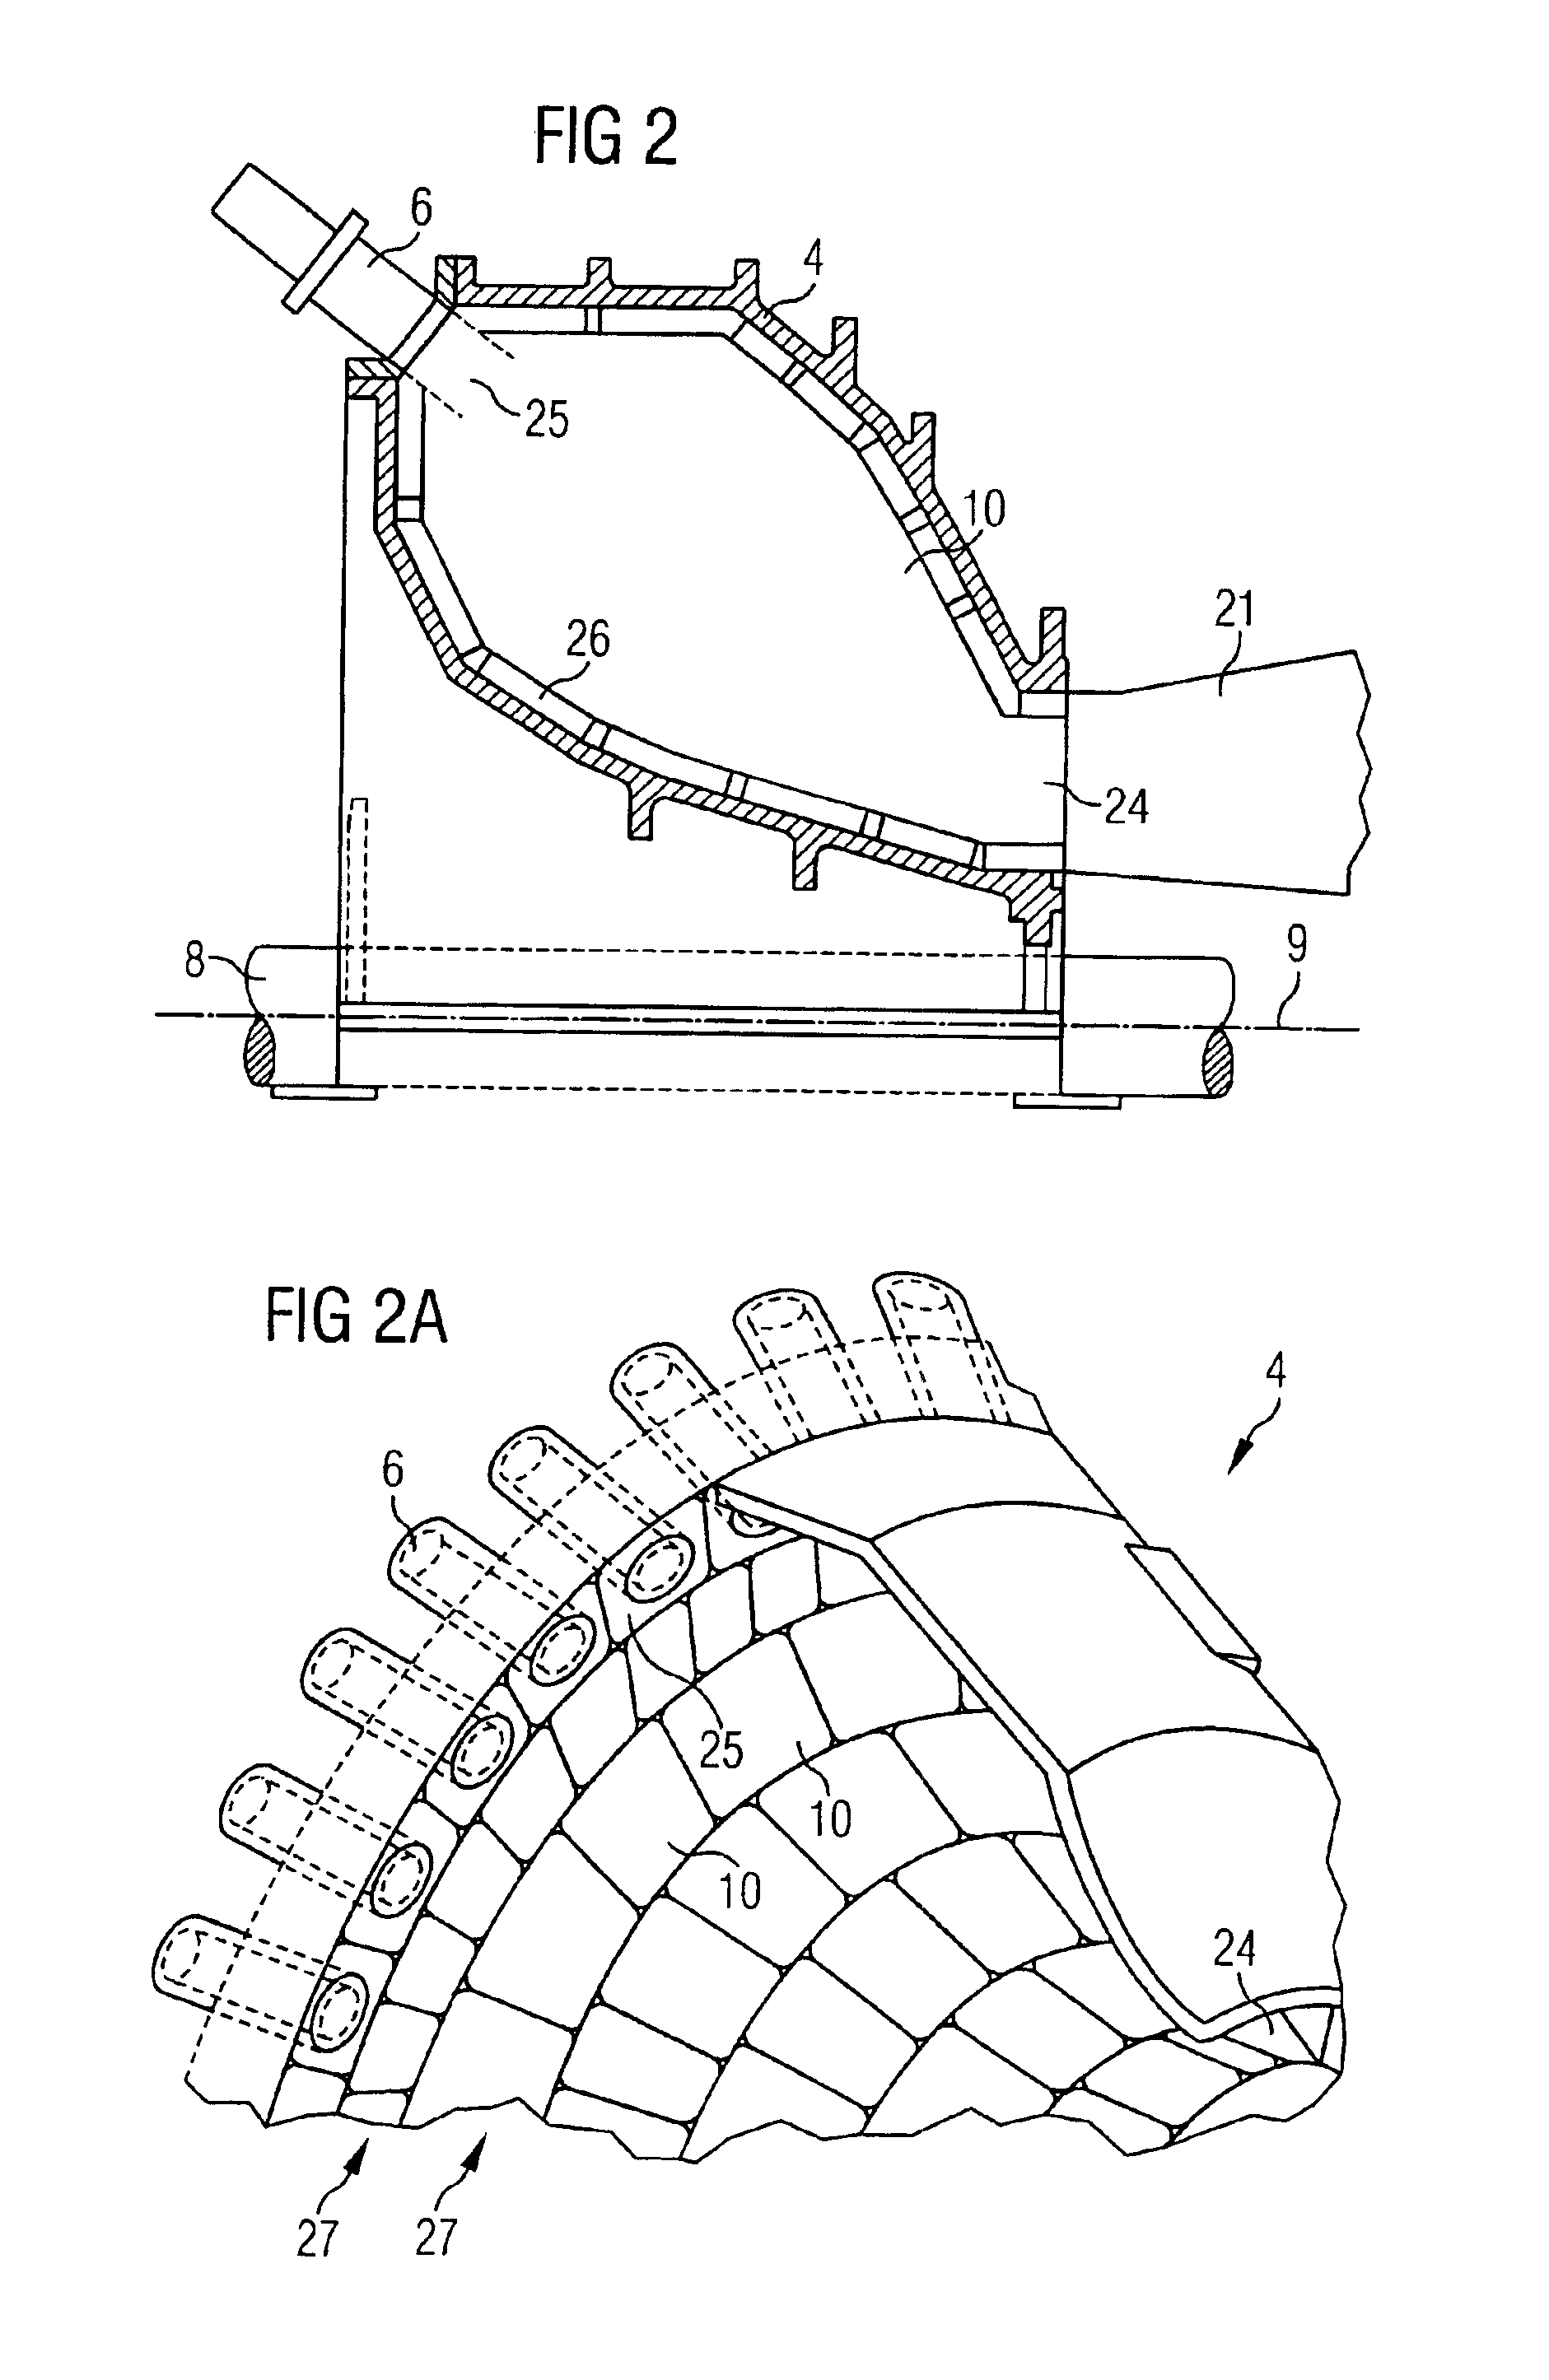 Annular combustion chambers for a gas turbine and gas turbine